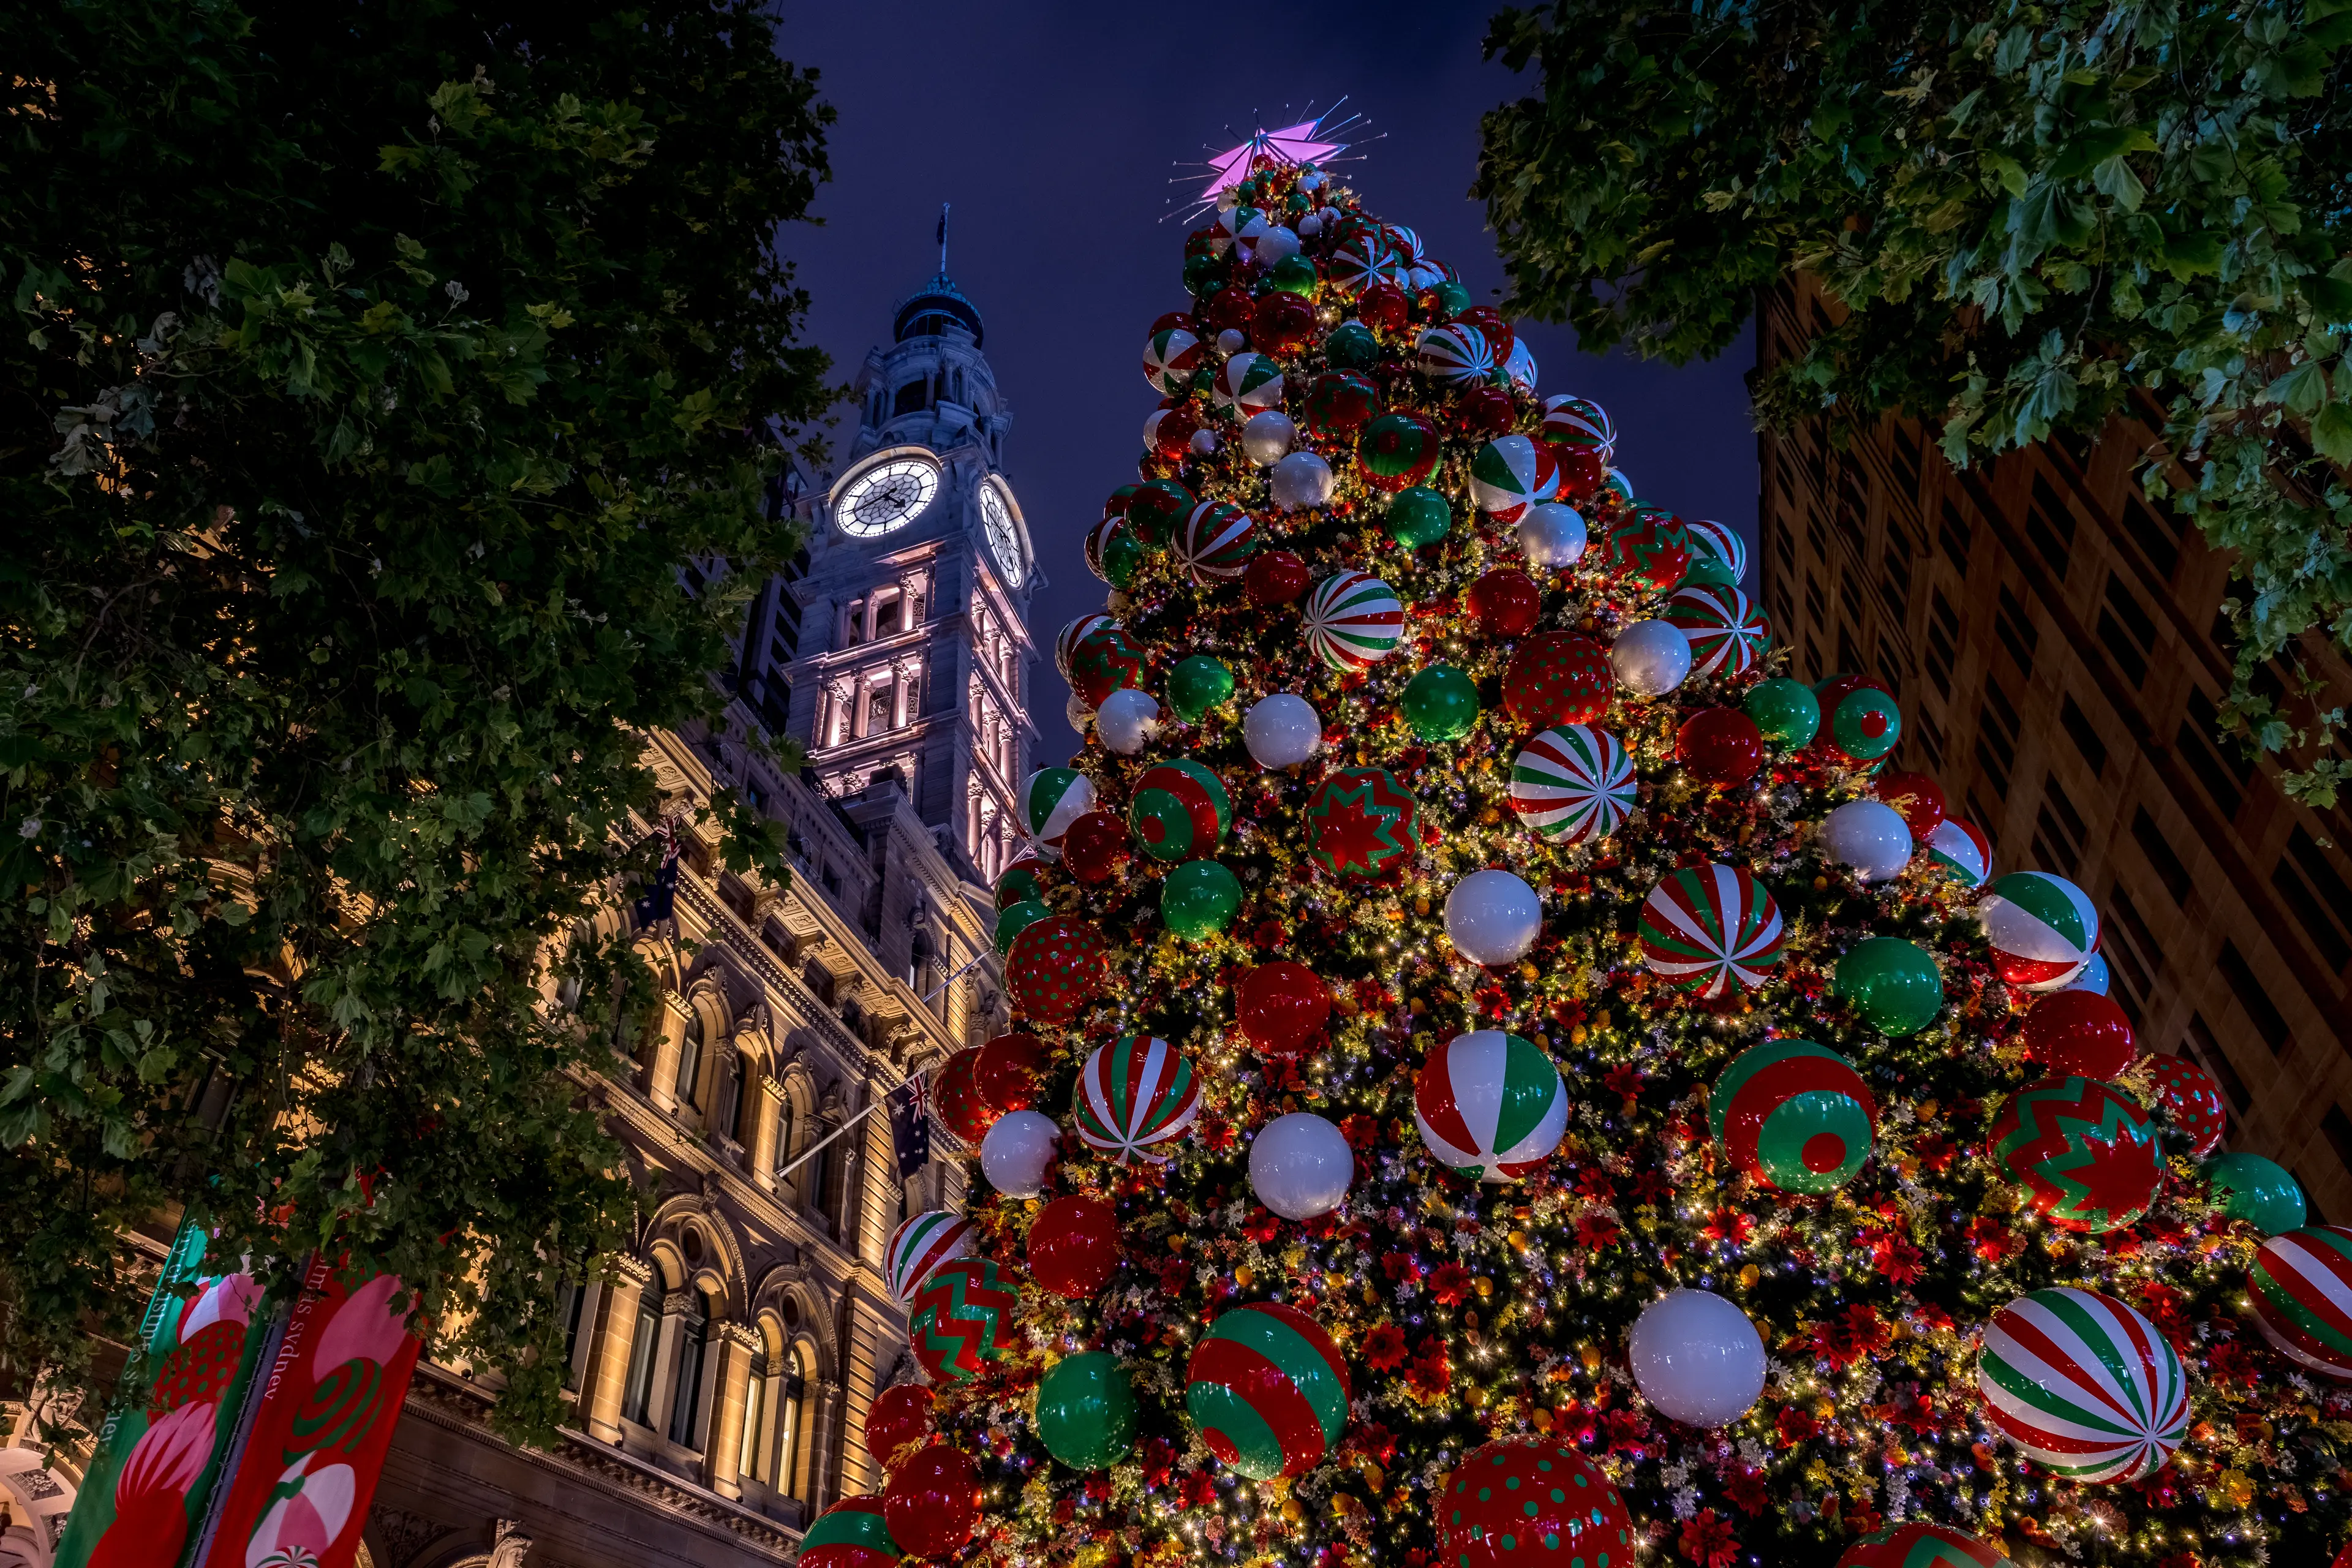 3-Day Sydney Christmas Holiday Itinerary for Couples